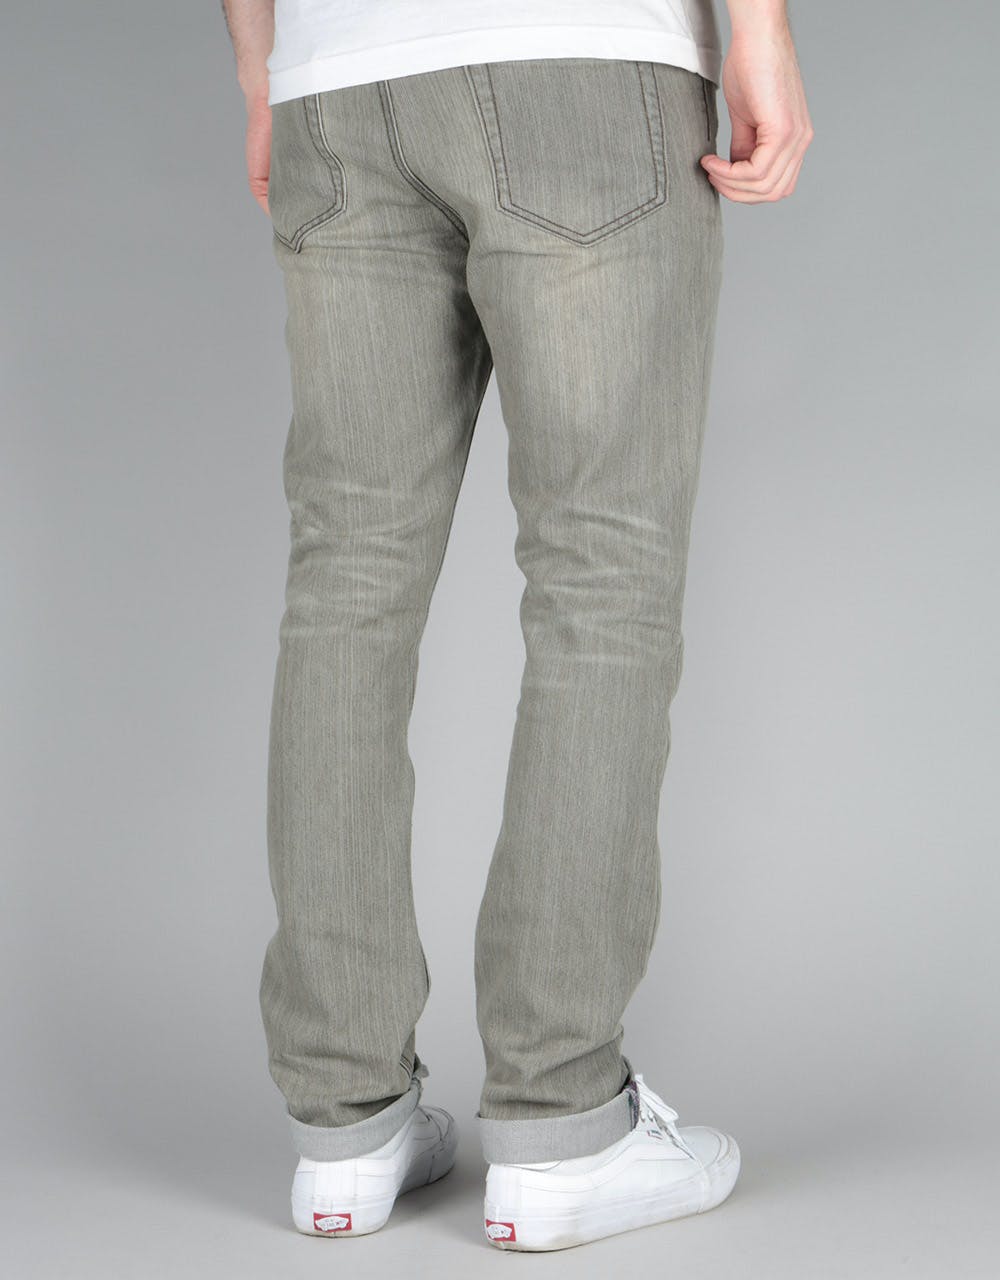 Route One Skinny Denim Jeans - Old Washed Grey